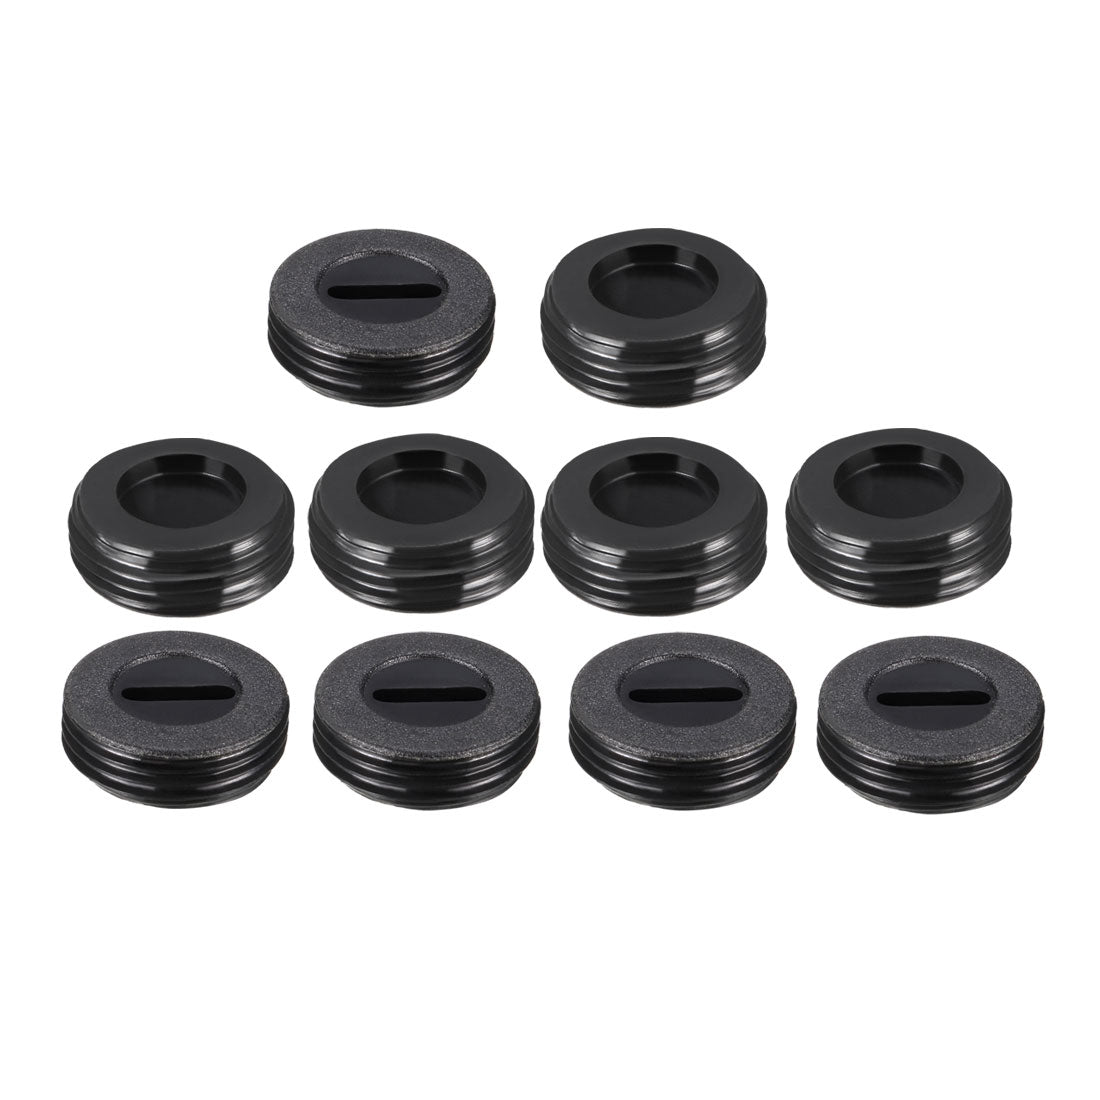 uxcell Uxcell Carbon Brush Holder Caps 14mm O.D. 7mm I.D. 4.7mm Thickness Motor Brush Cover Plastic Fitting Thread Black 10pcs